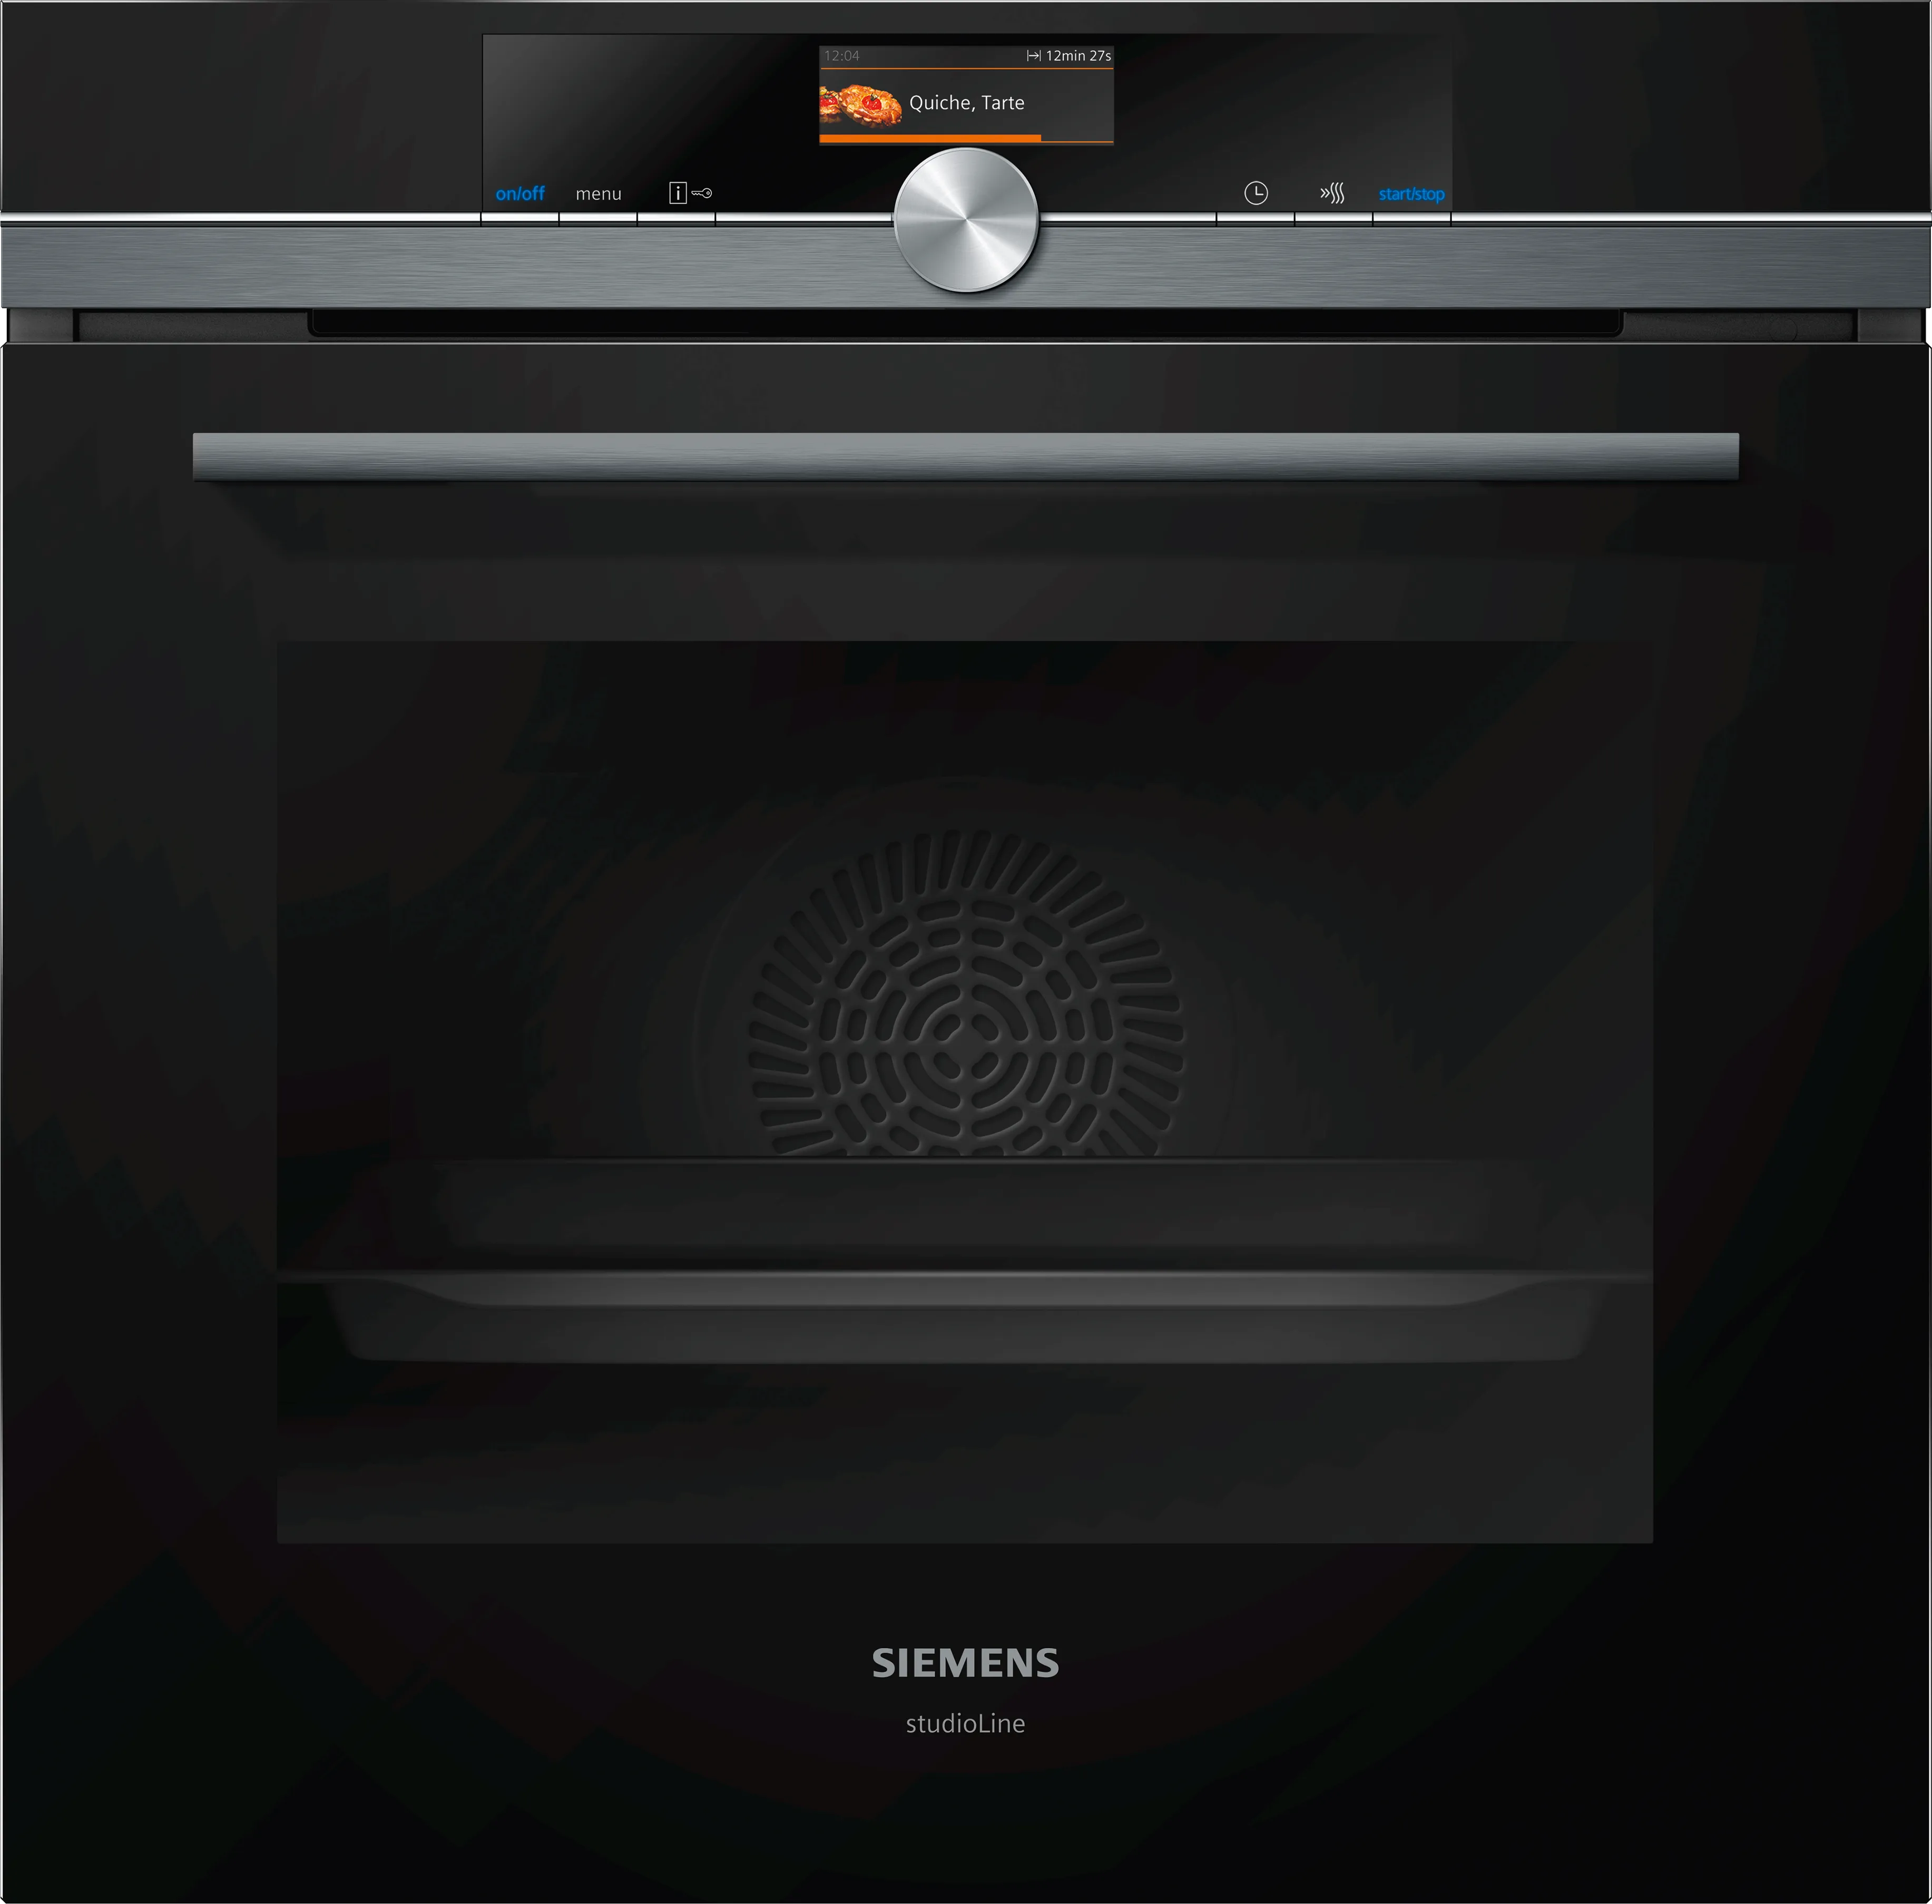 iQ700 Built-in oven with microwave function 60 x 60 cm Black 